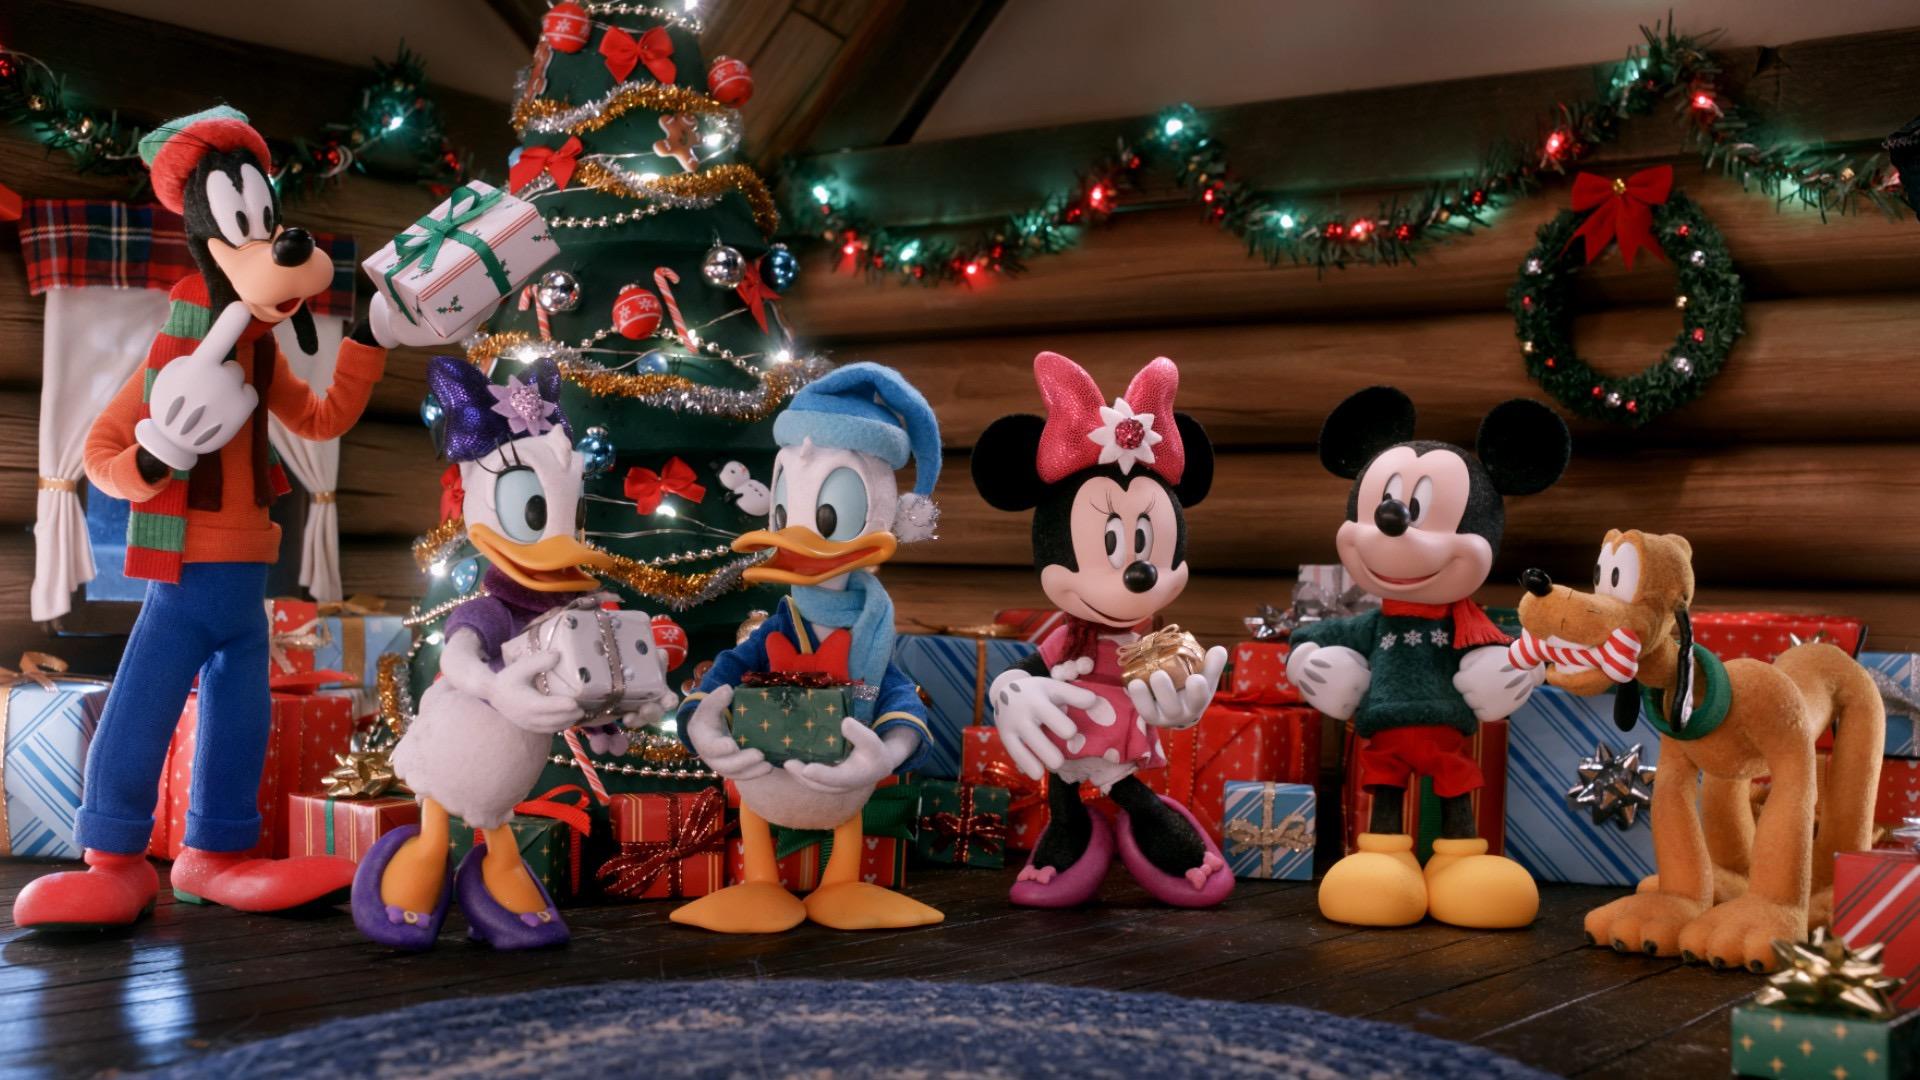 GOOFY, DAISY DUCK, DONALD DUCK, MINNIE MOUSE, MICKEY MOUSE, PLUTO